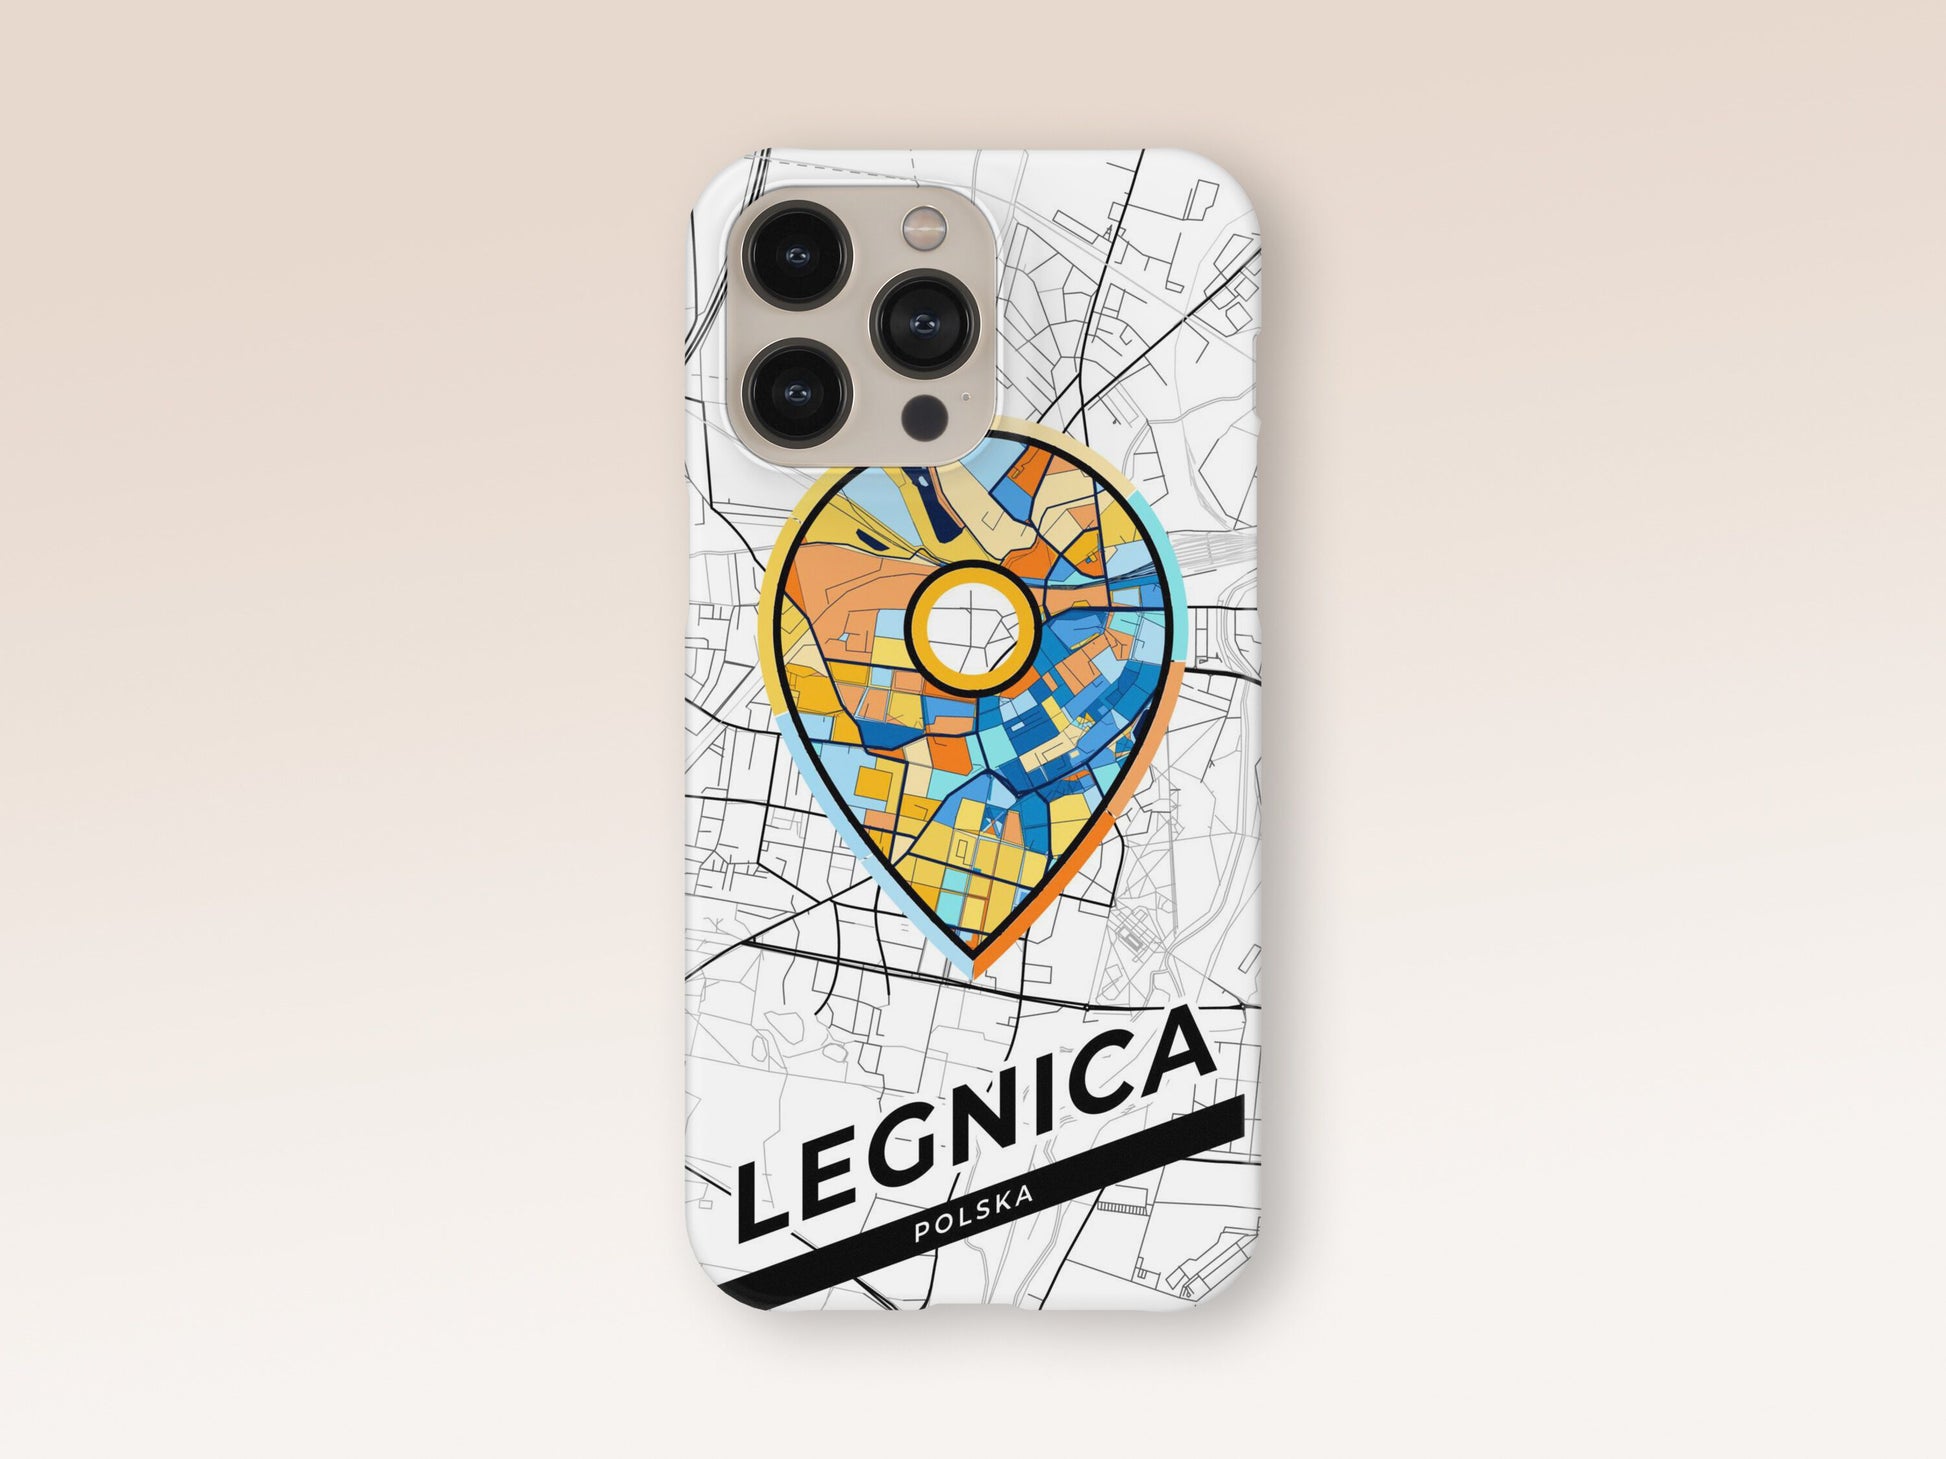 Legnica Poland slim phone case with colorful icon. Birthday, wedding or housewarming gift. Couple match cases. 1